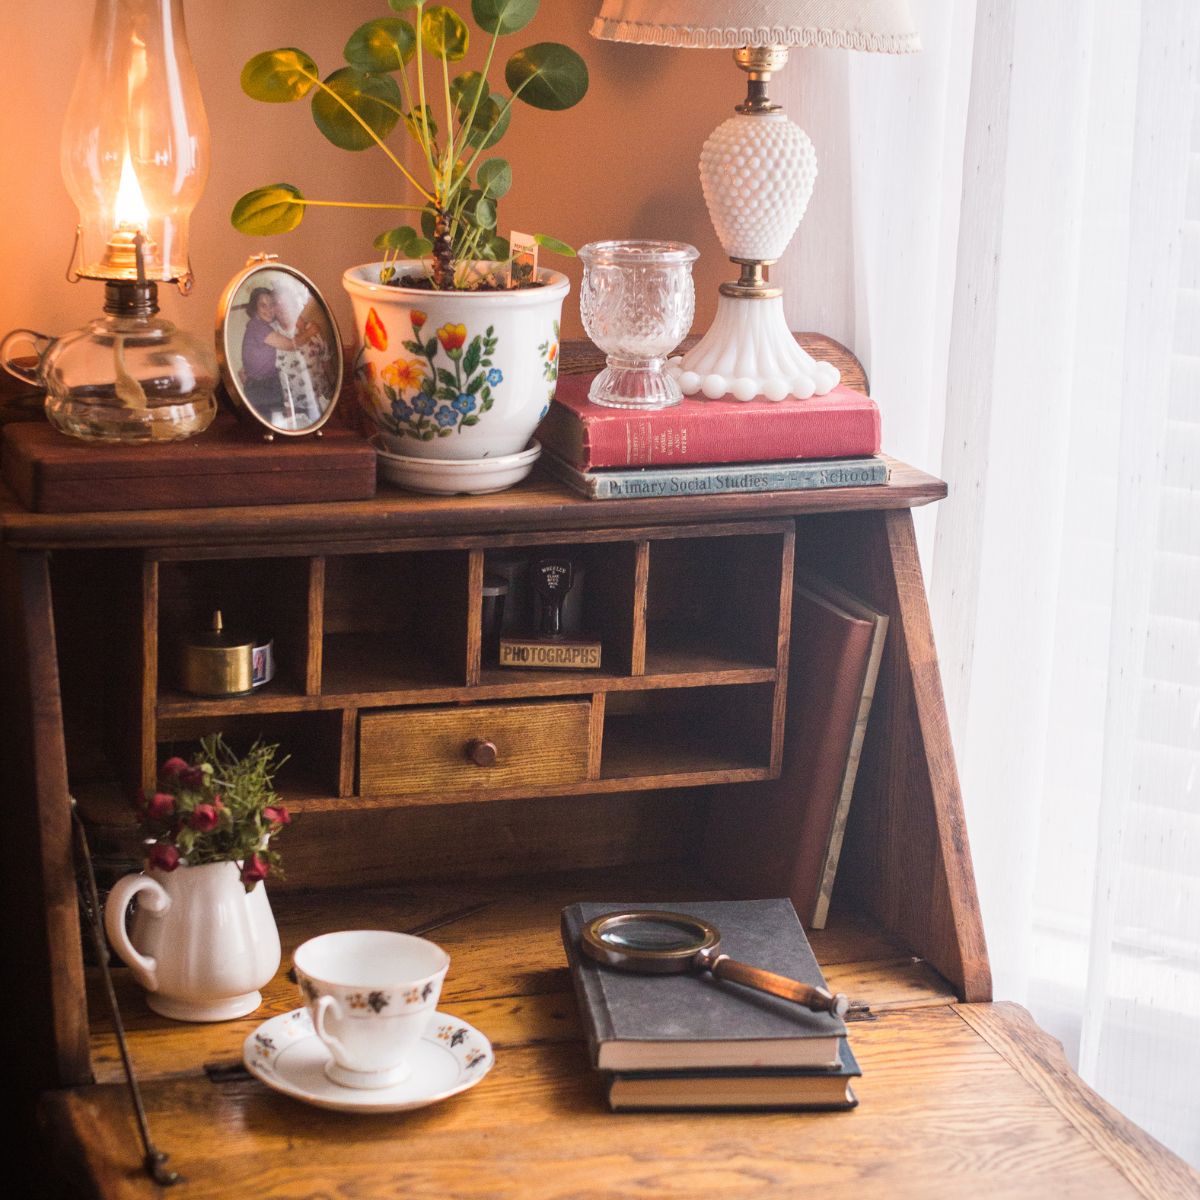 How to Style an Antique Secretary Desk With Decor